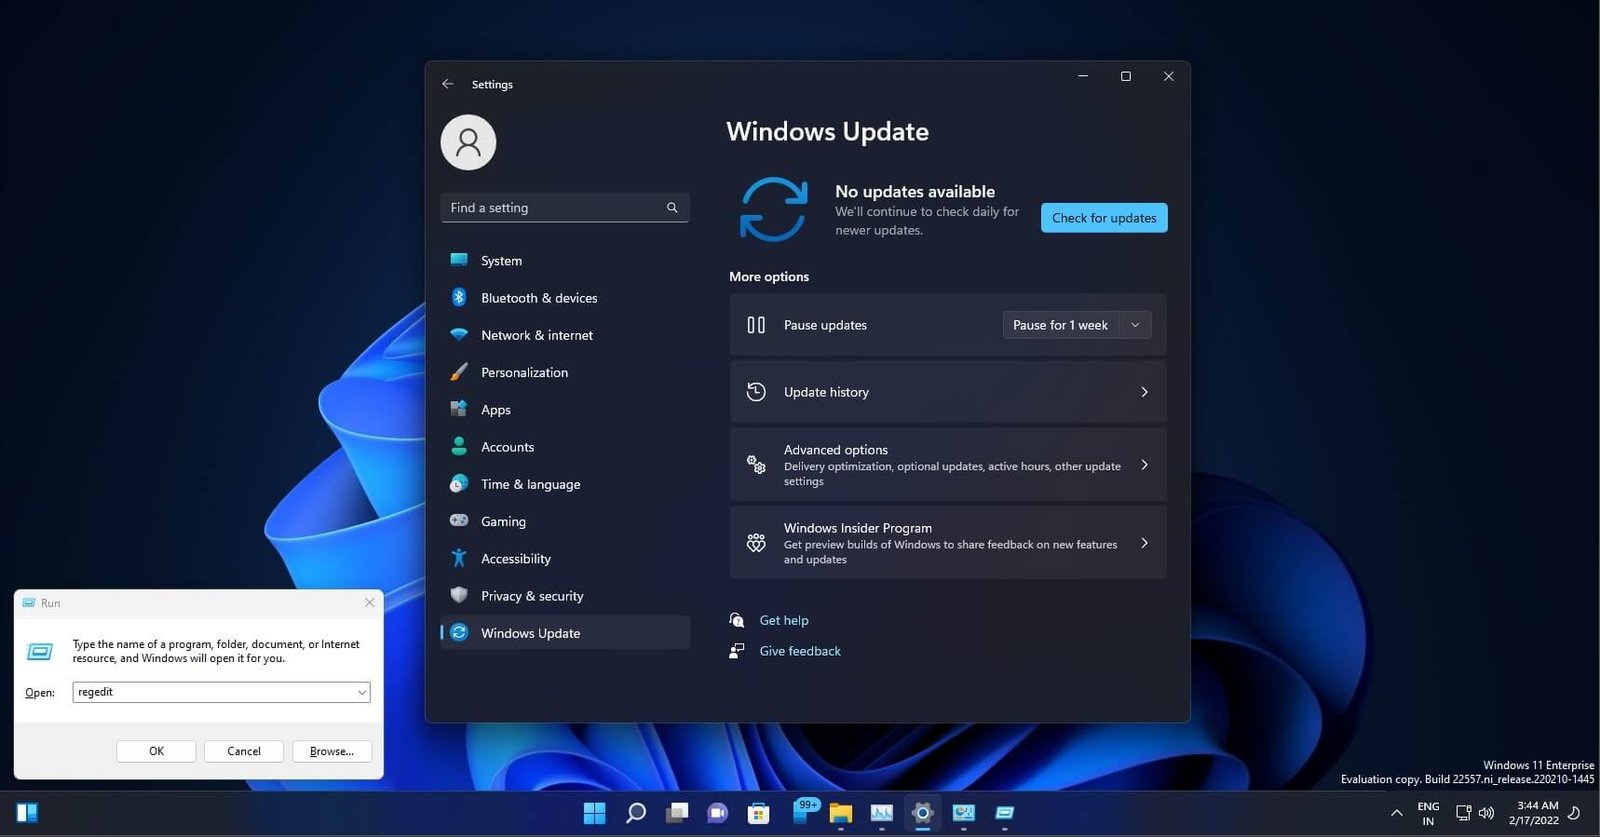 Windows 11 Insider Preview Build 22557 Features